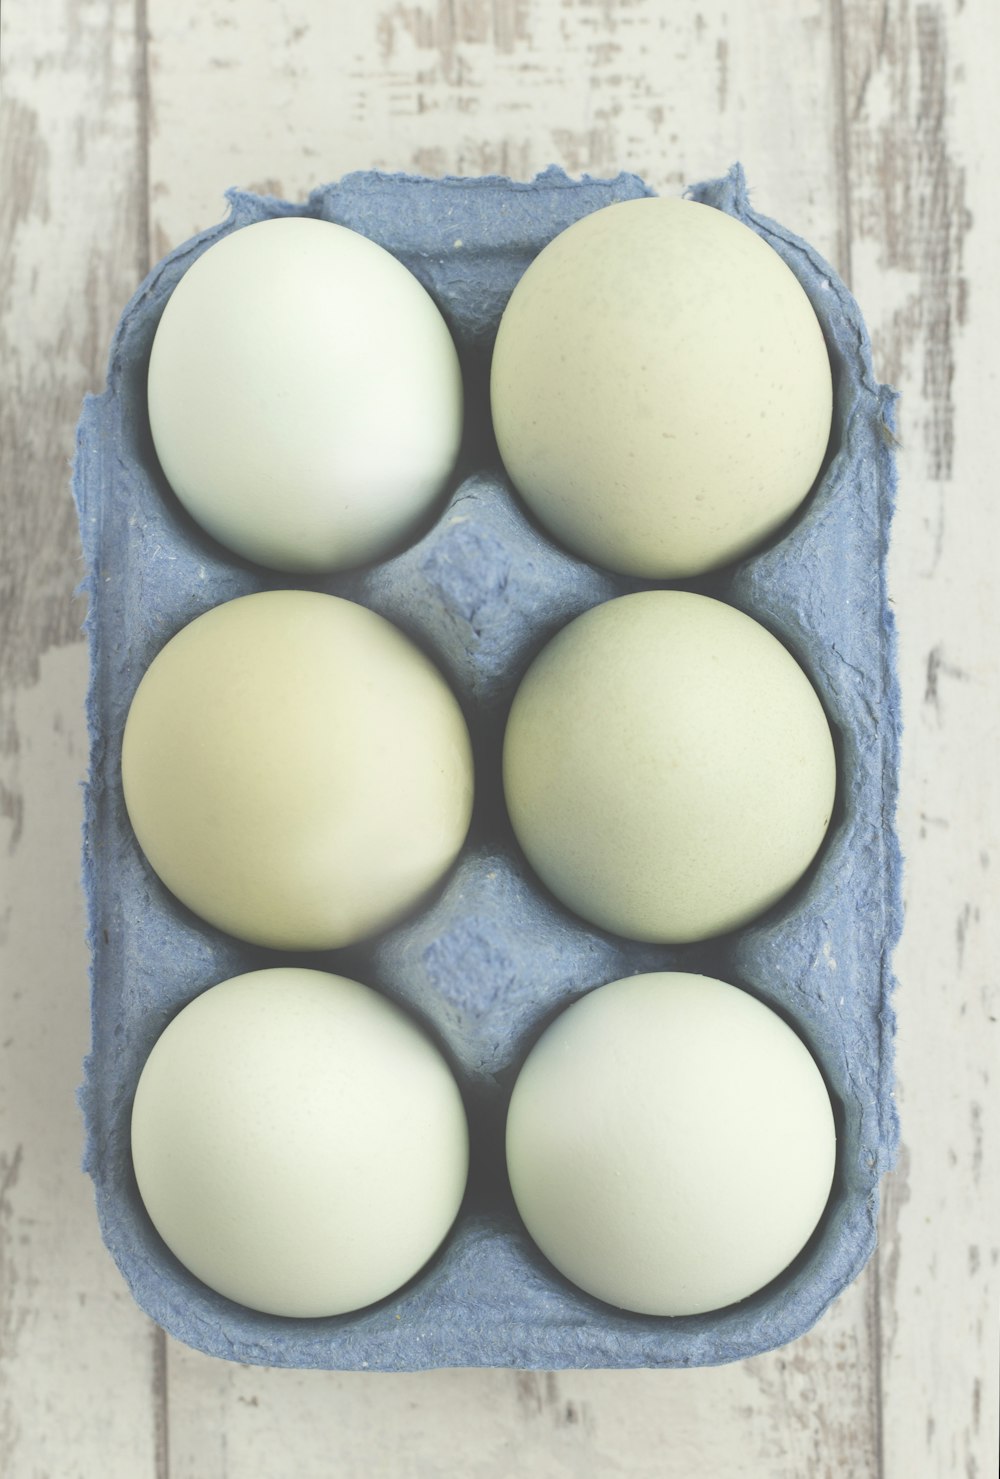 six white eggs placed on gray tray